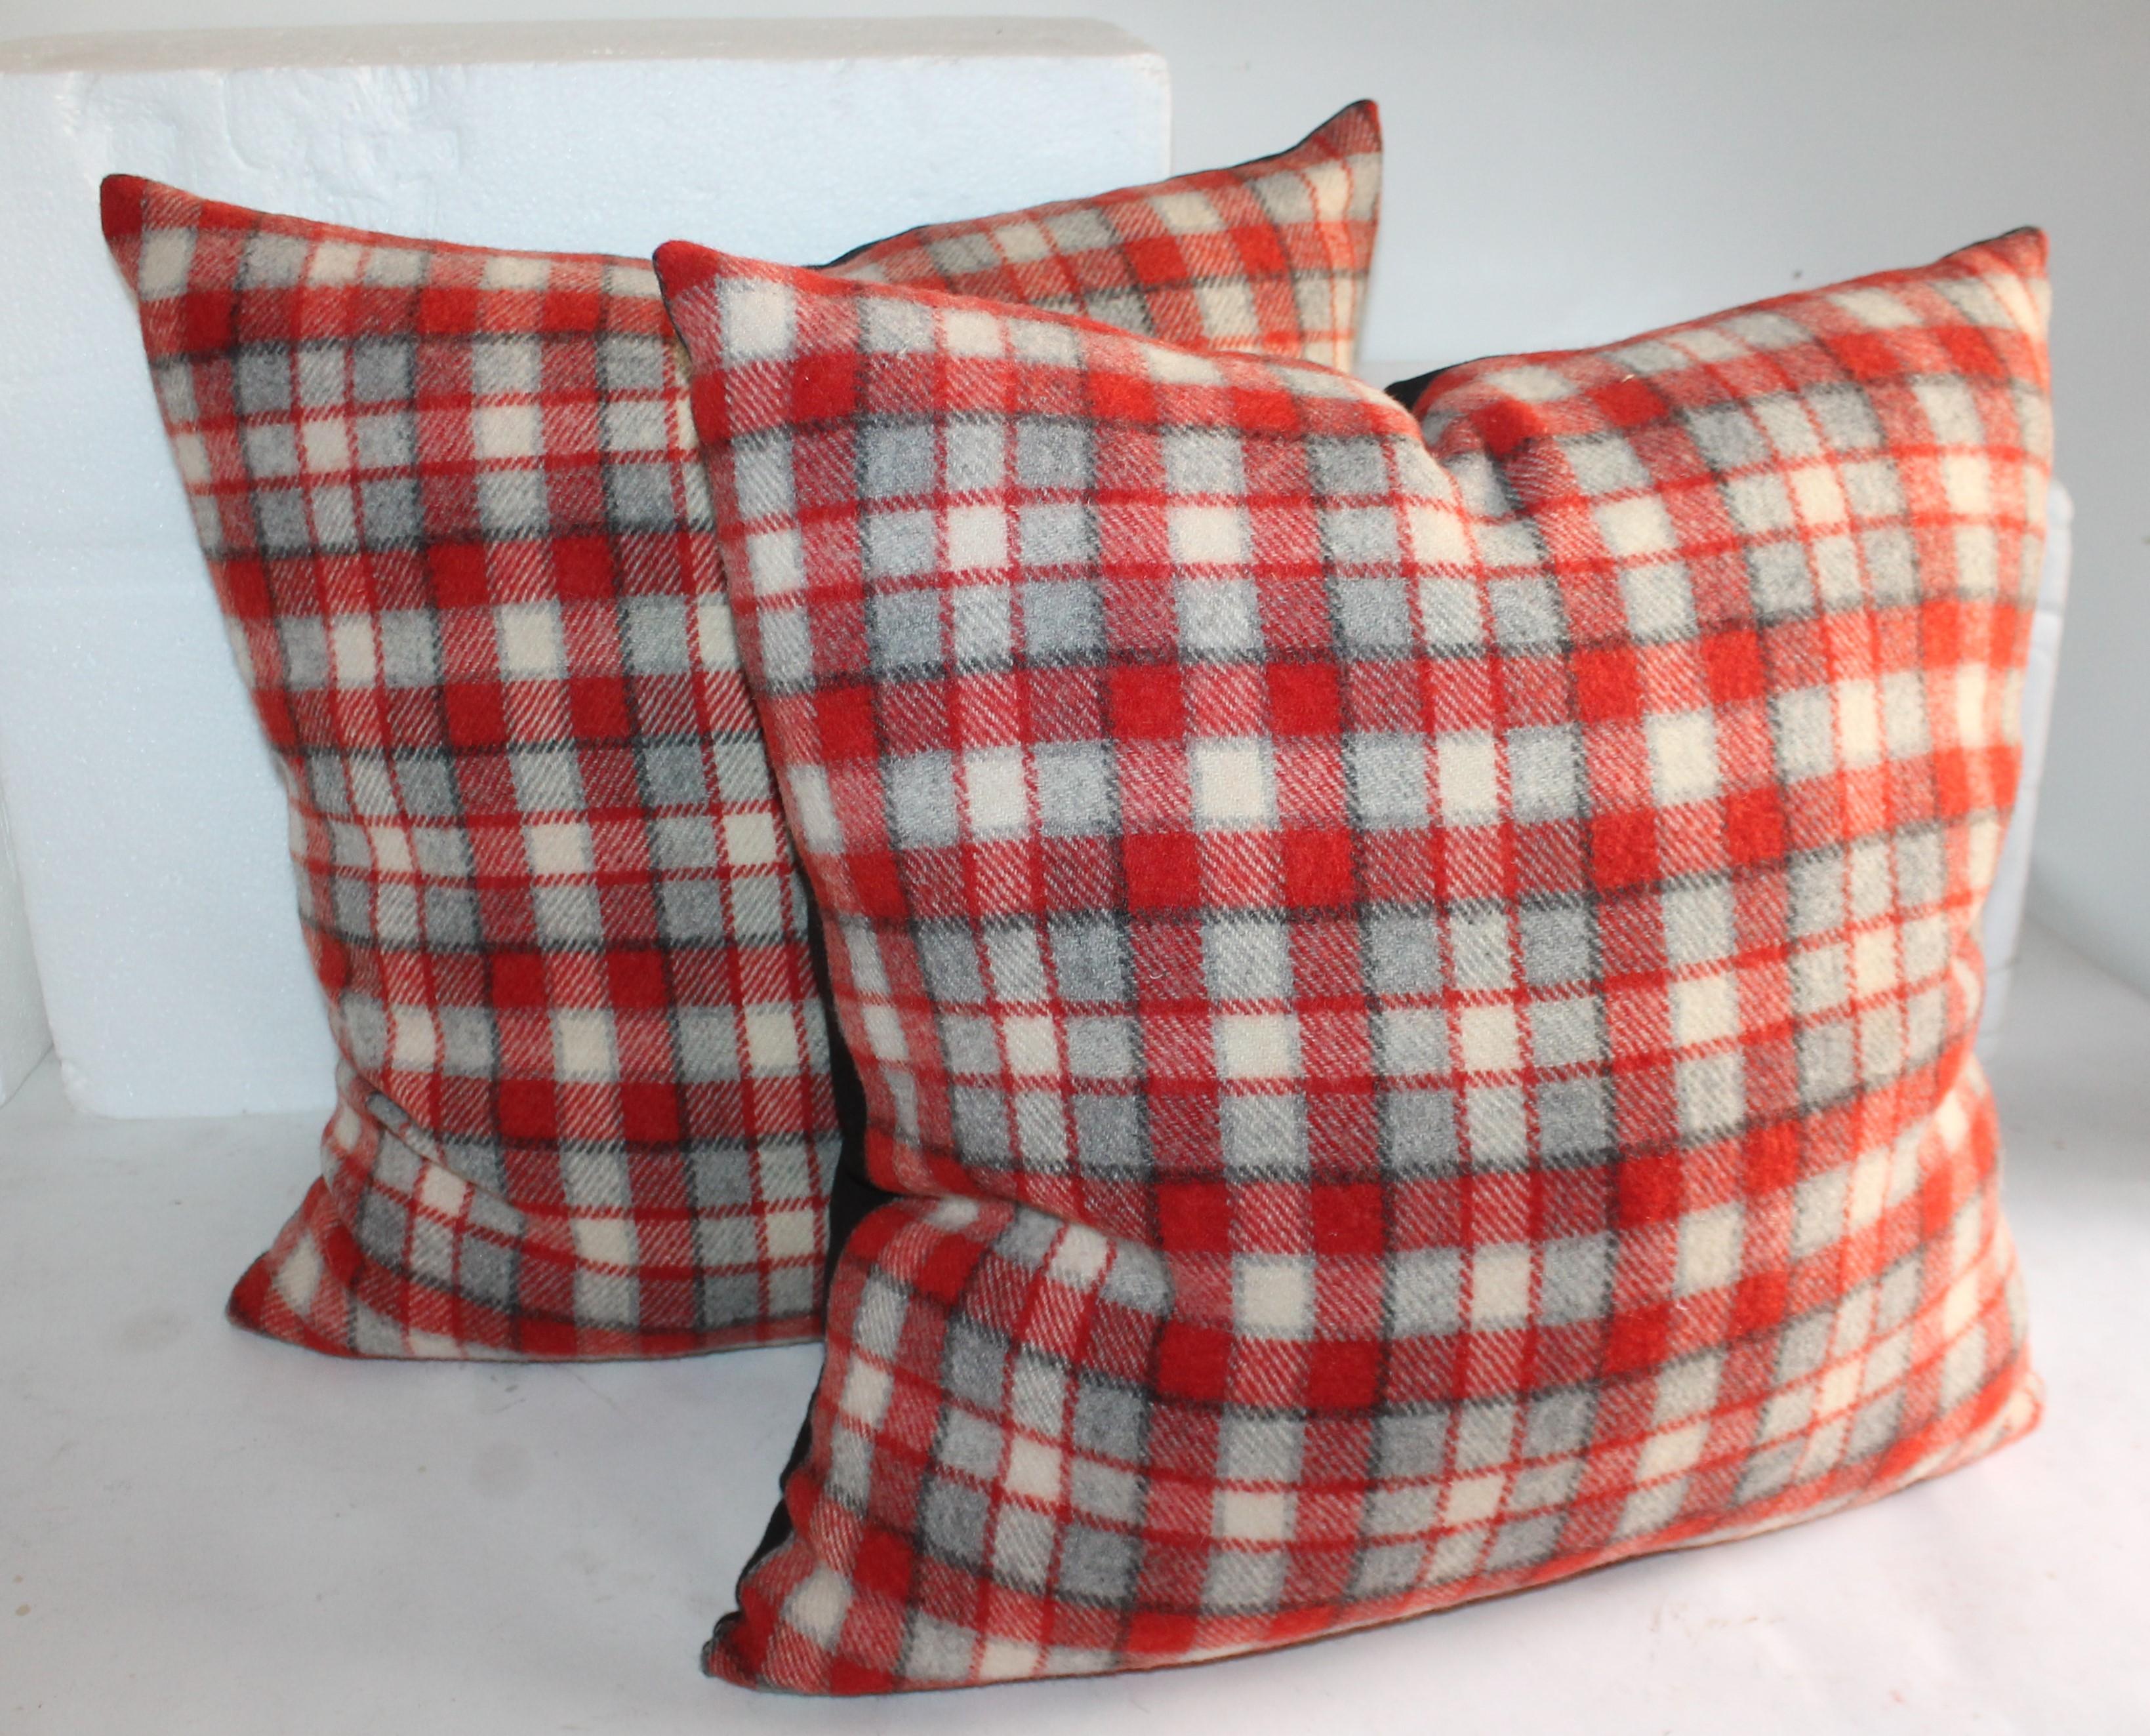 Collection of amazing plaid camp blanket pillows with red, gray, cream and black stripes. These are beautiful subtle wool pillows.